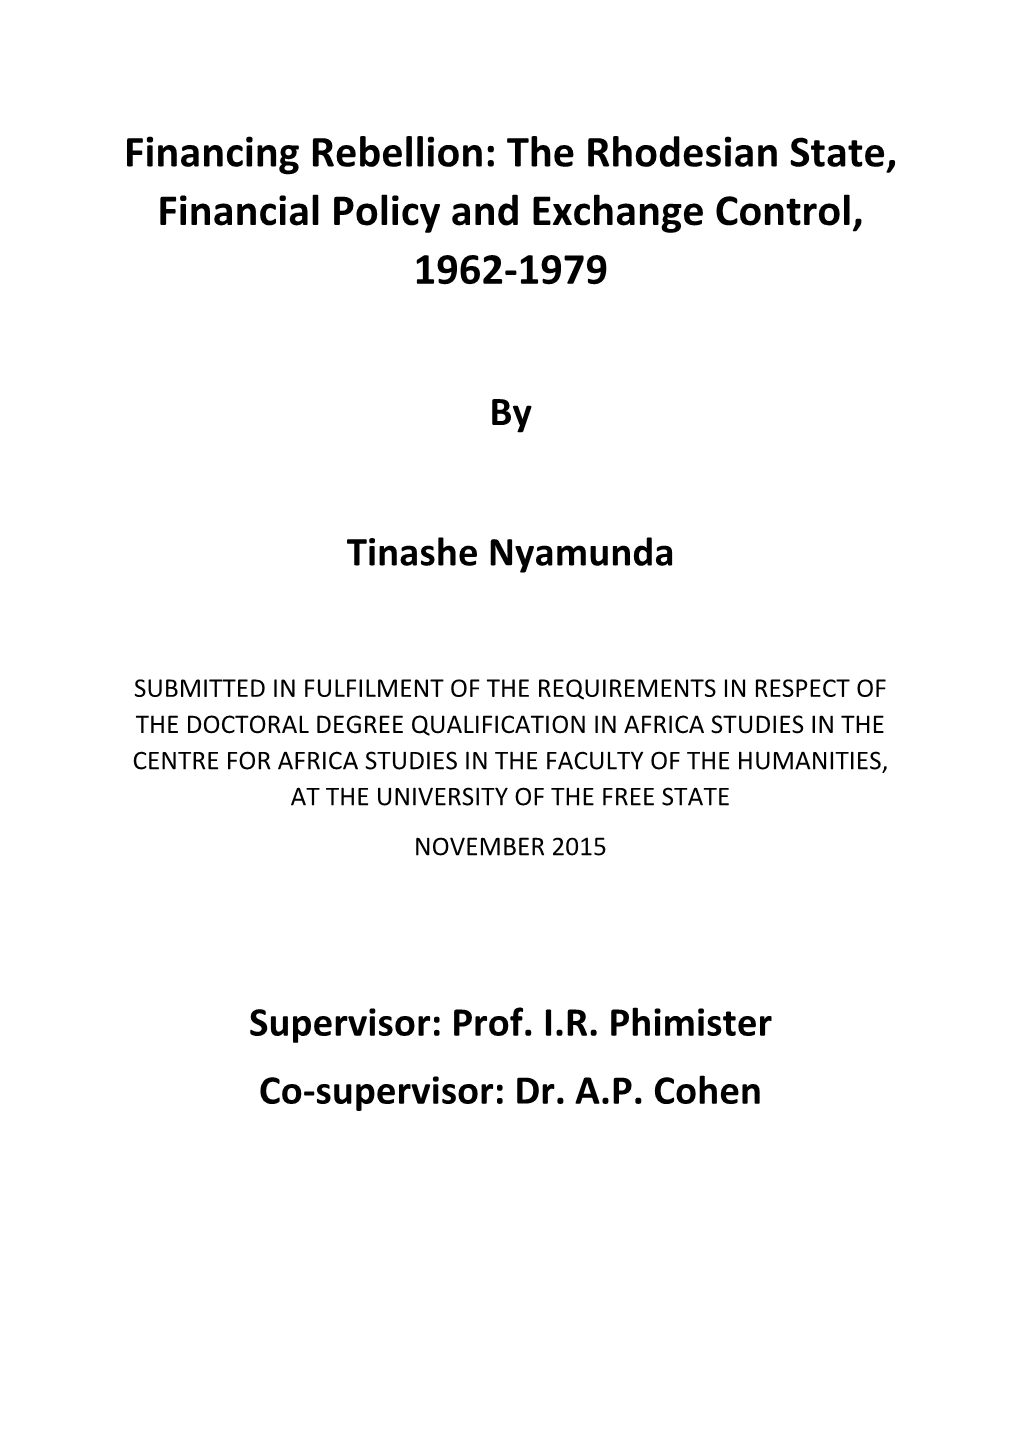 The Rhodesian State, Financial Policy and Exchange Control, 1962-1979